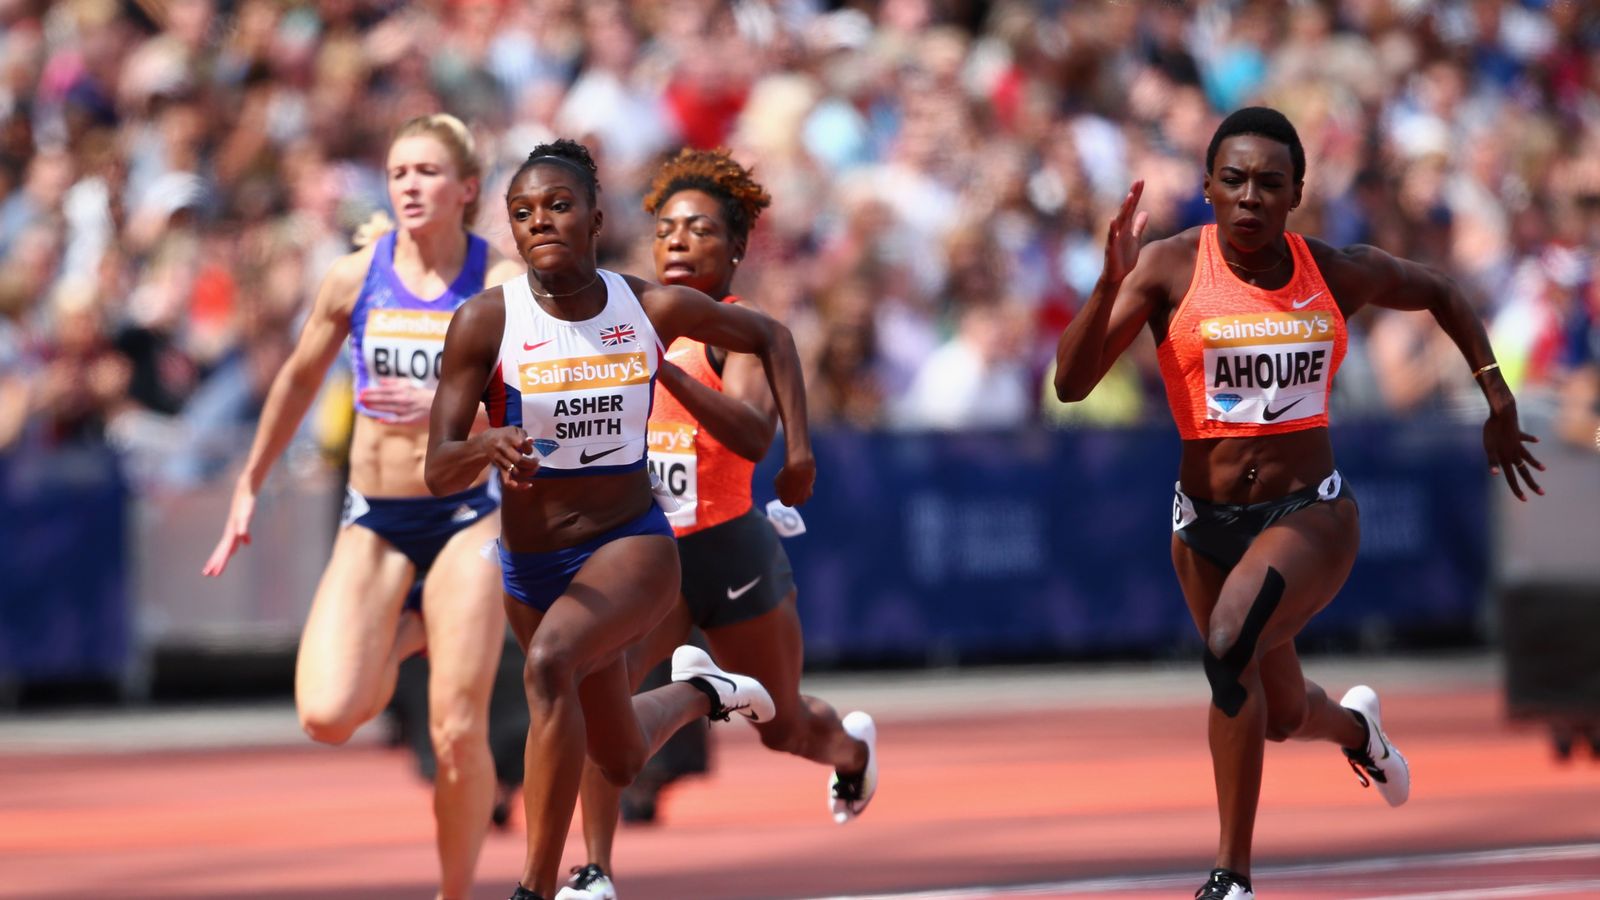 Dina Asher Smith Breaks 11 Second Mark For 100m At Anniversary Games